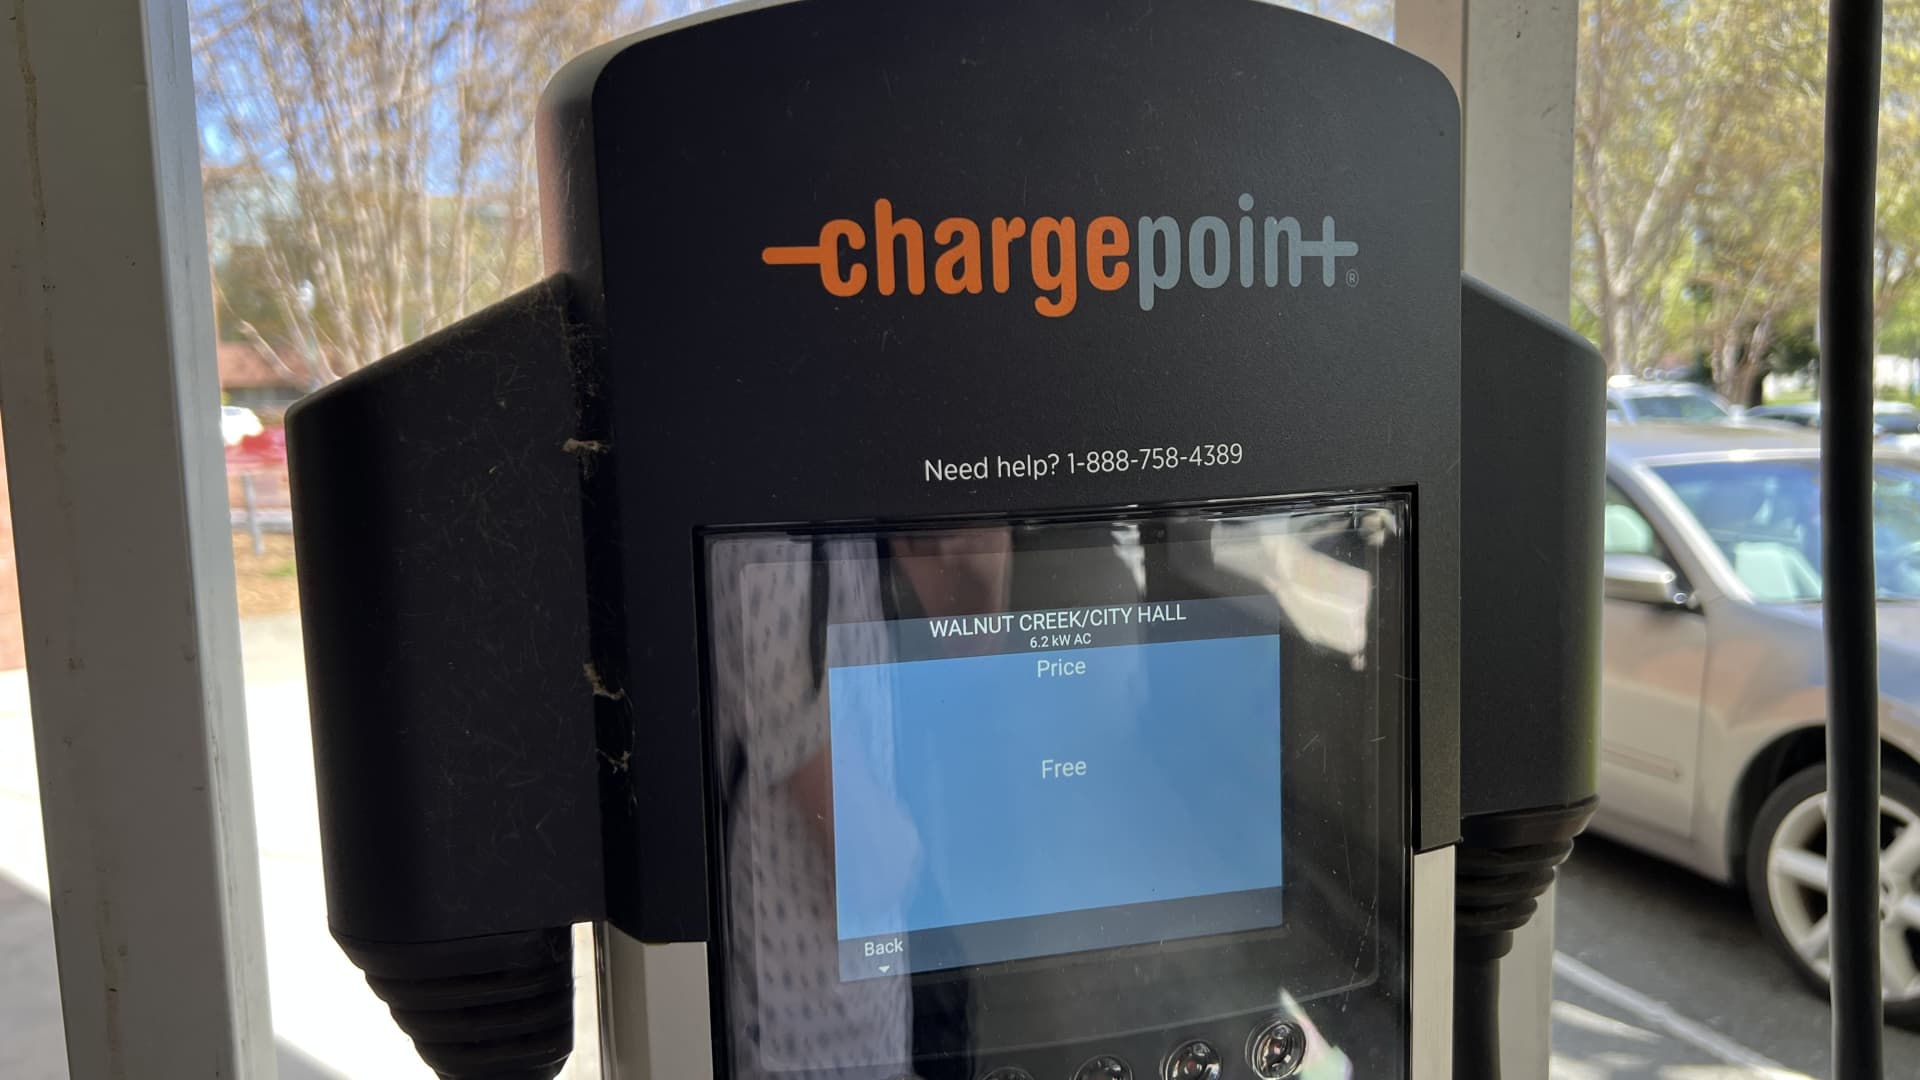 ChargePoint raising $232 million, shares fall